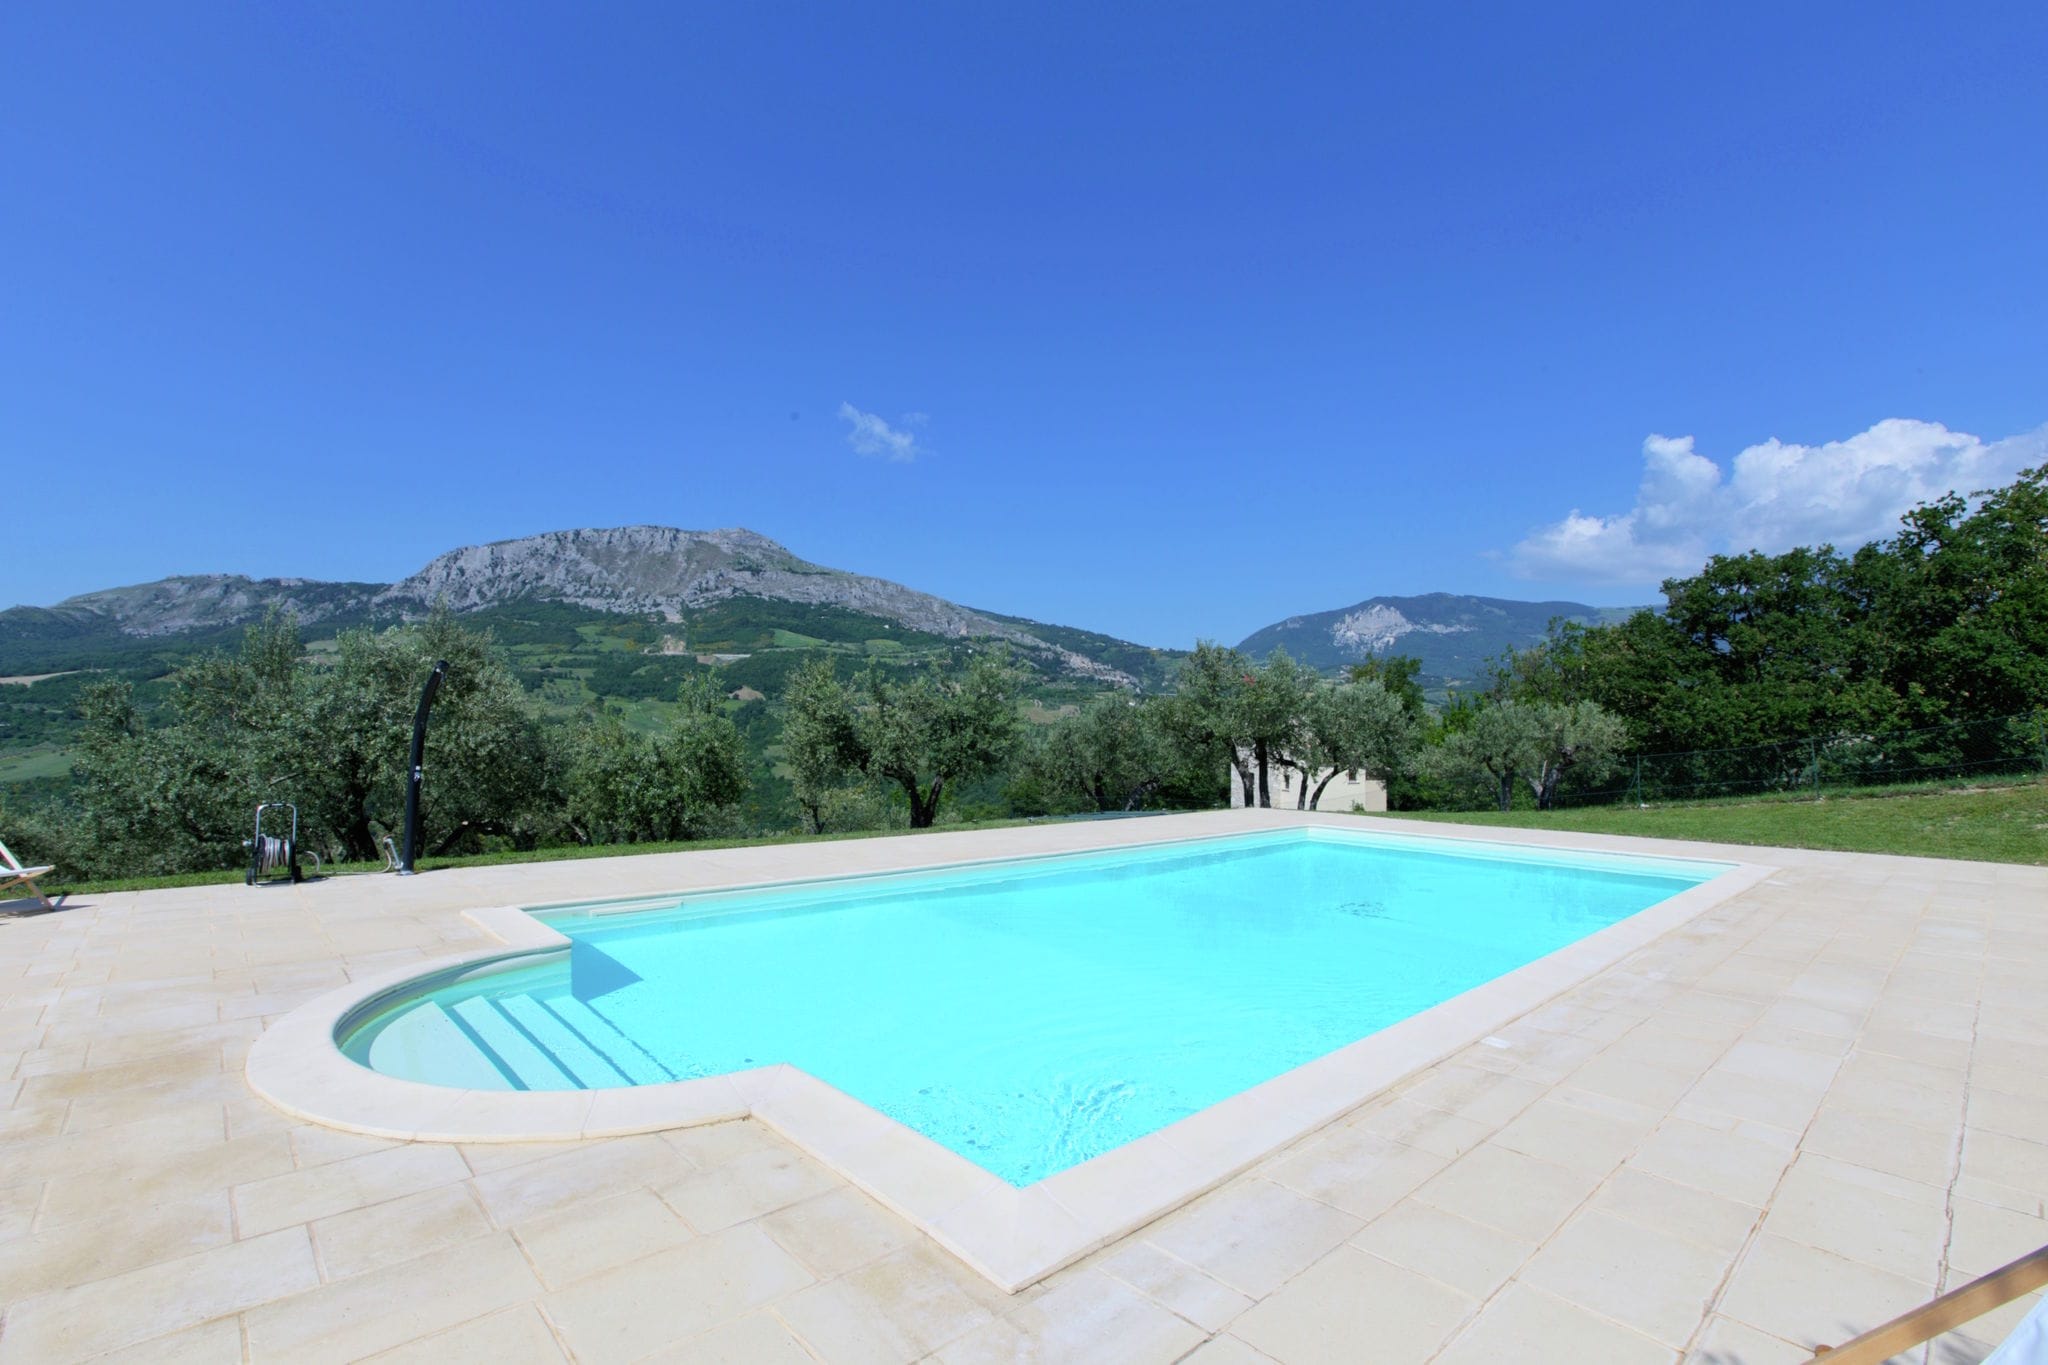 Villa with tower between olive trees with private swimming pool, nice view